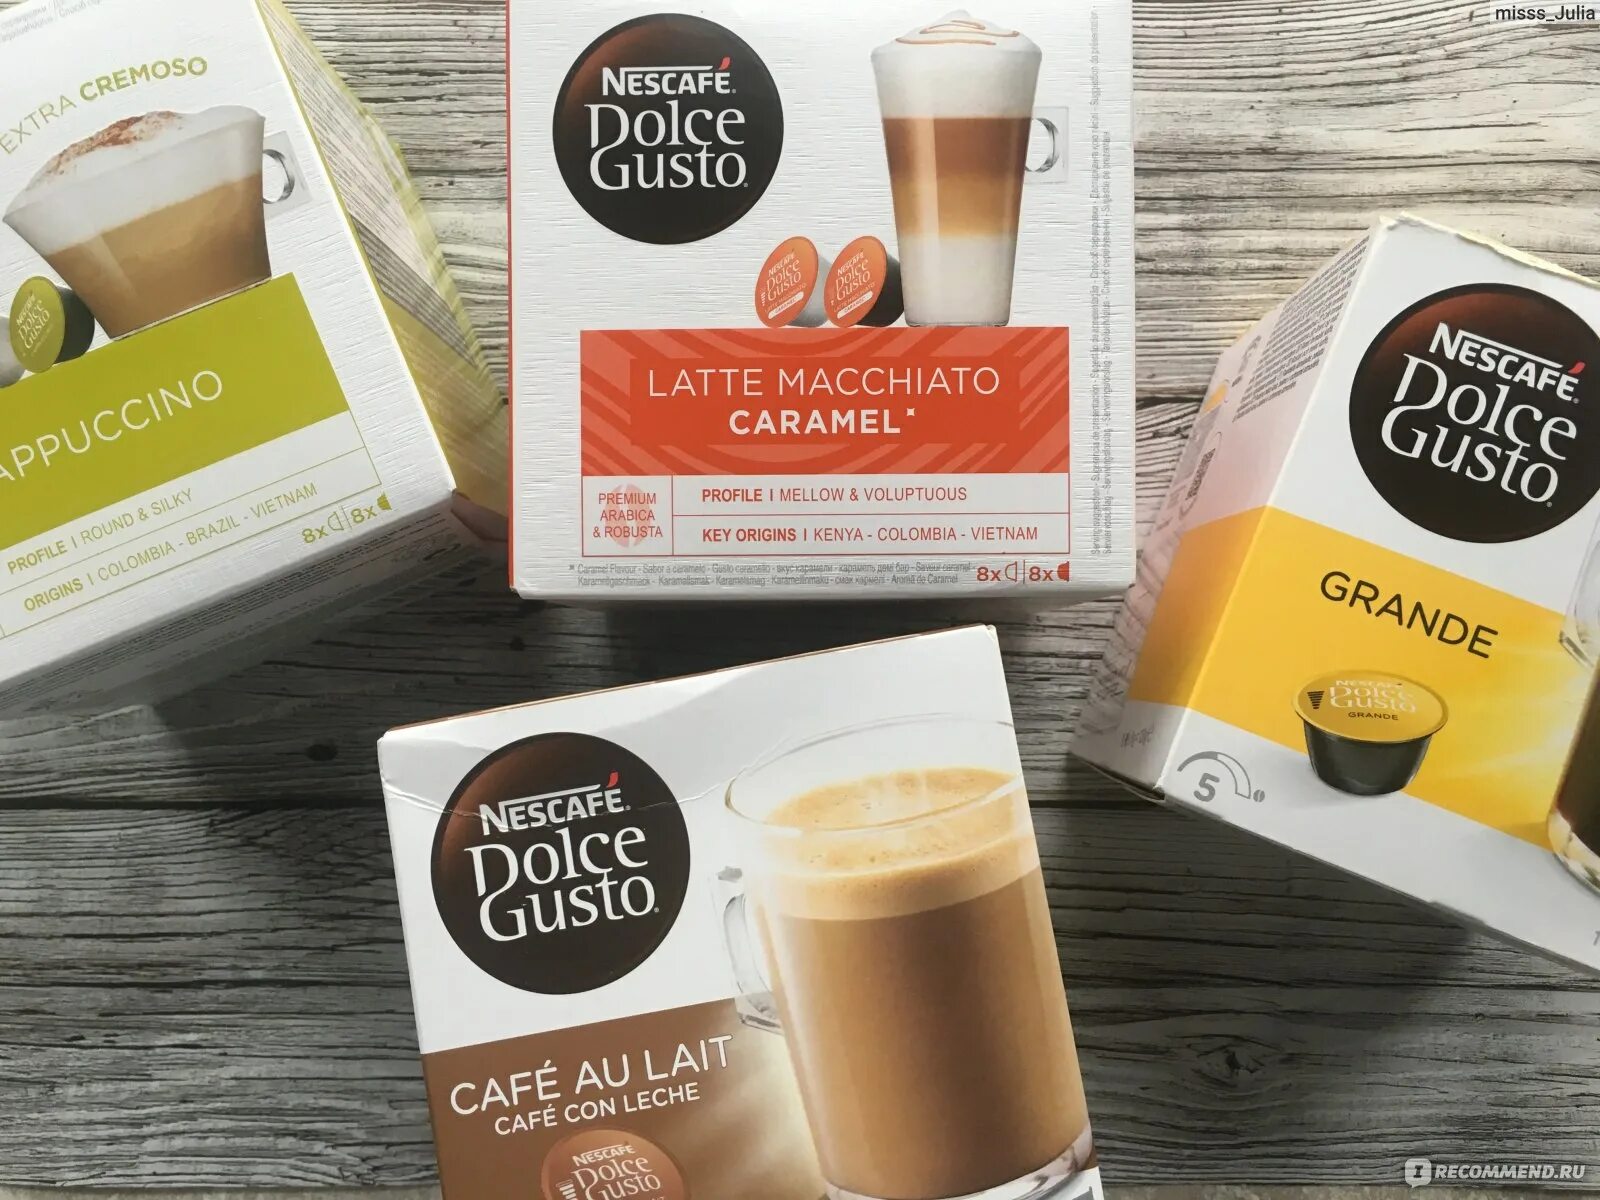 Капсулы Dolce gusto Cappuccino. Капсулы Дольче густо капучино карамель. Капсулы Nescafe Dolce gusto Cappuccino 30шт. Капсулы Nescafe Dolce gusto Cappuccino 8*23.3гр (3). Dolce gusto cappuccino